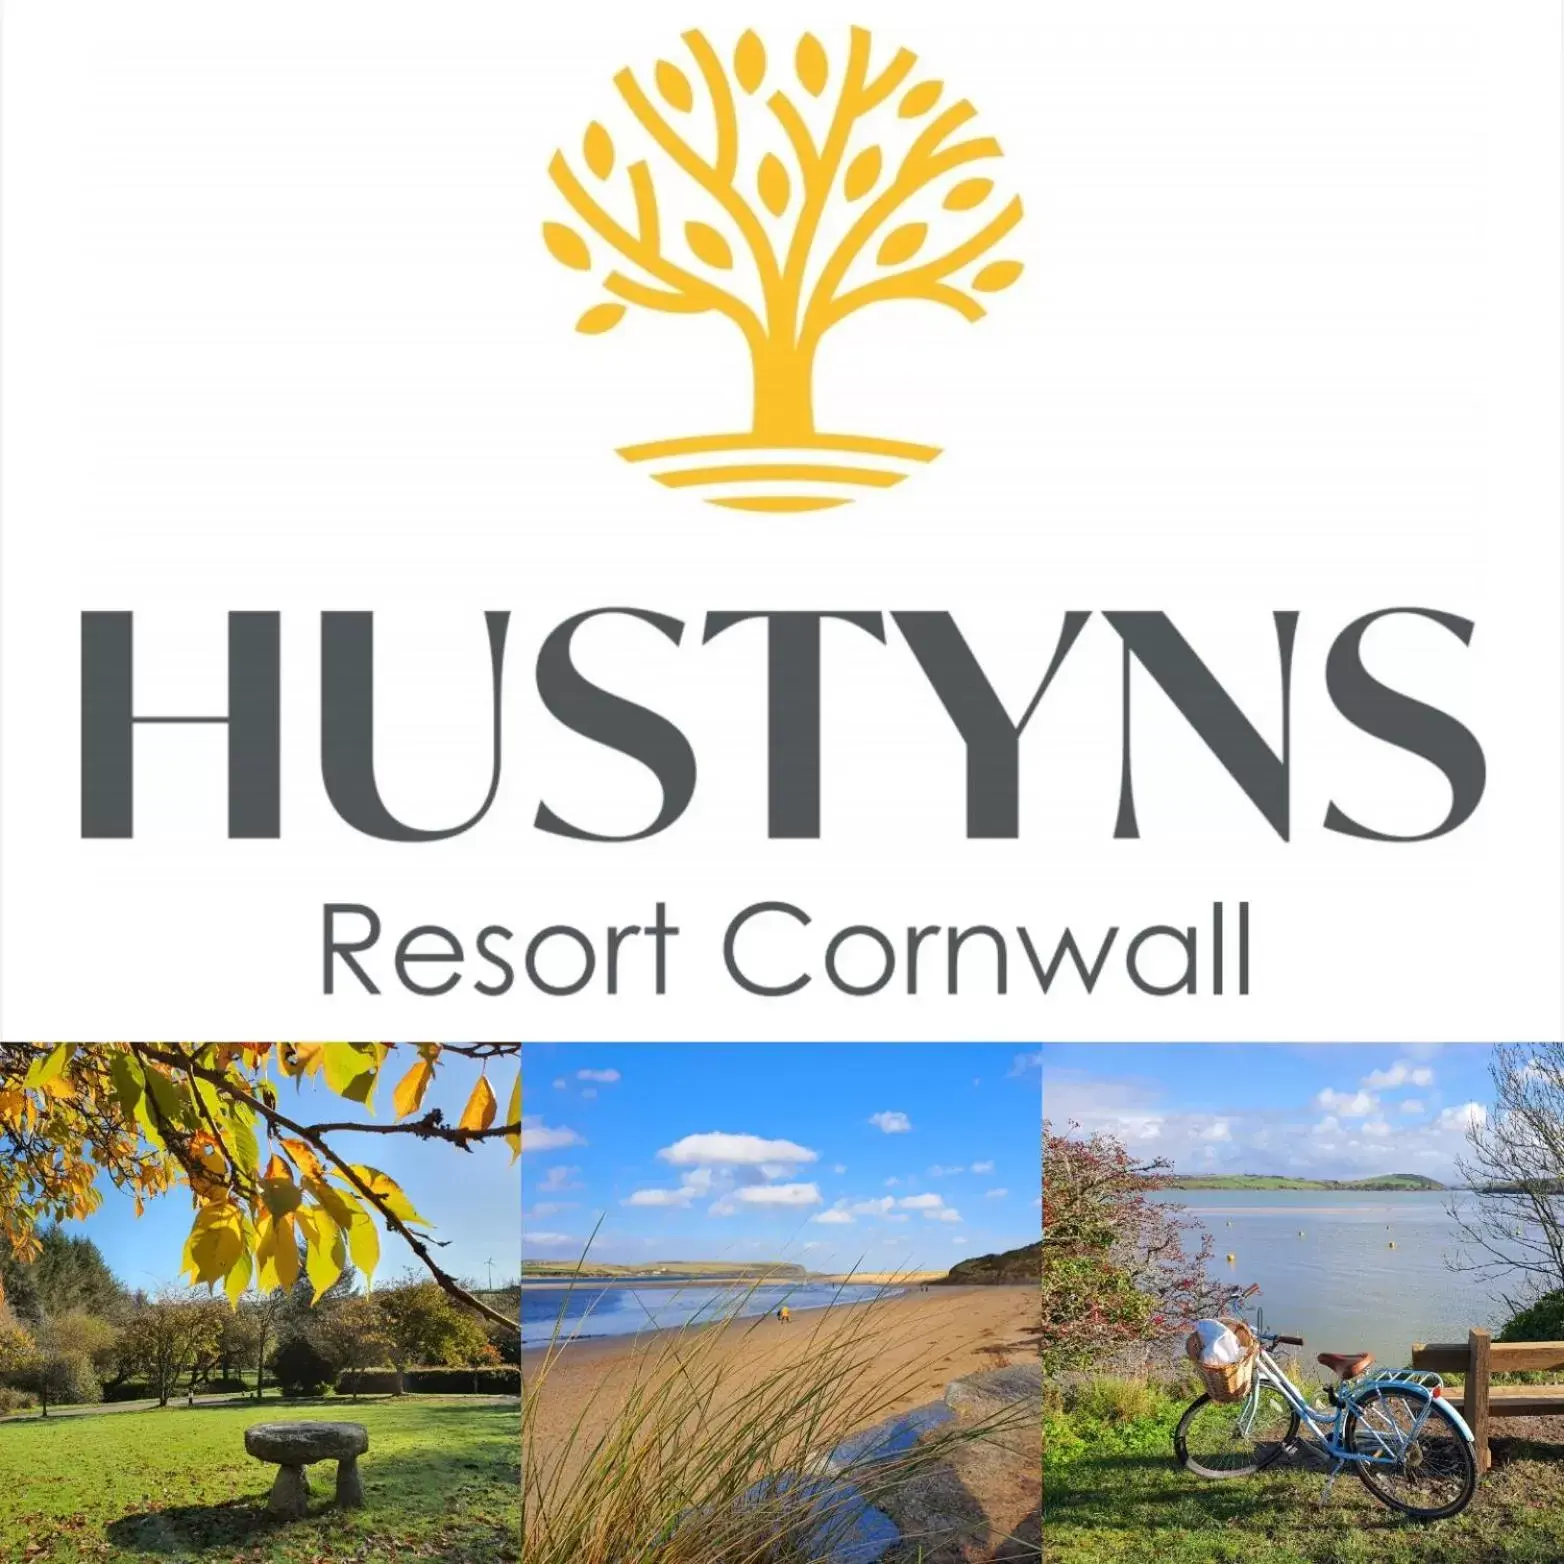 Property logo or sign, Property Logo/Sign in Hustyns Resort Cornwall